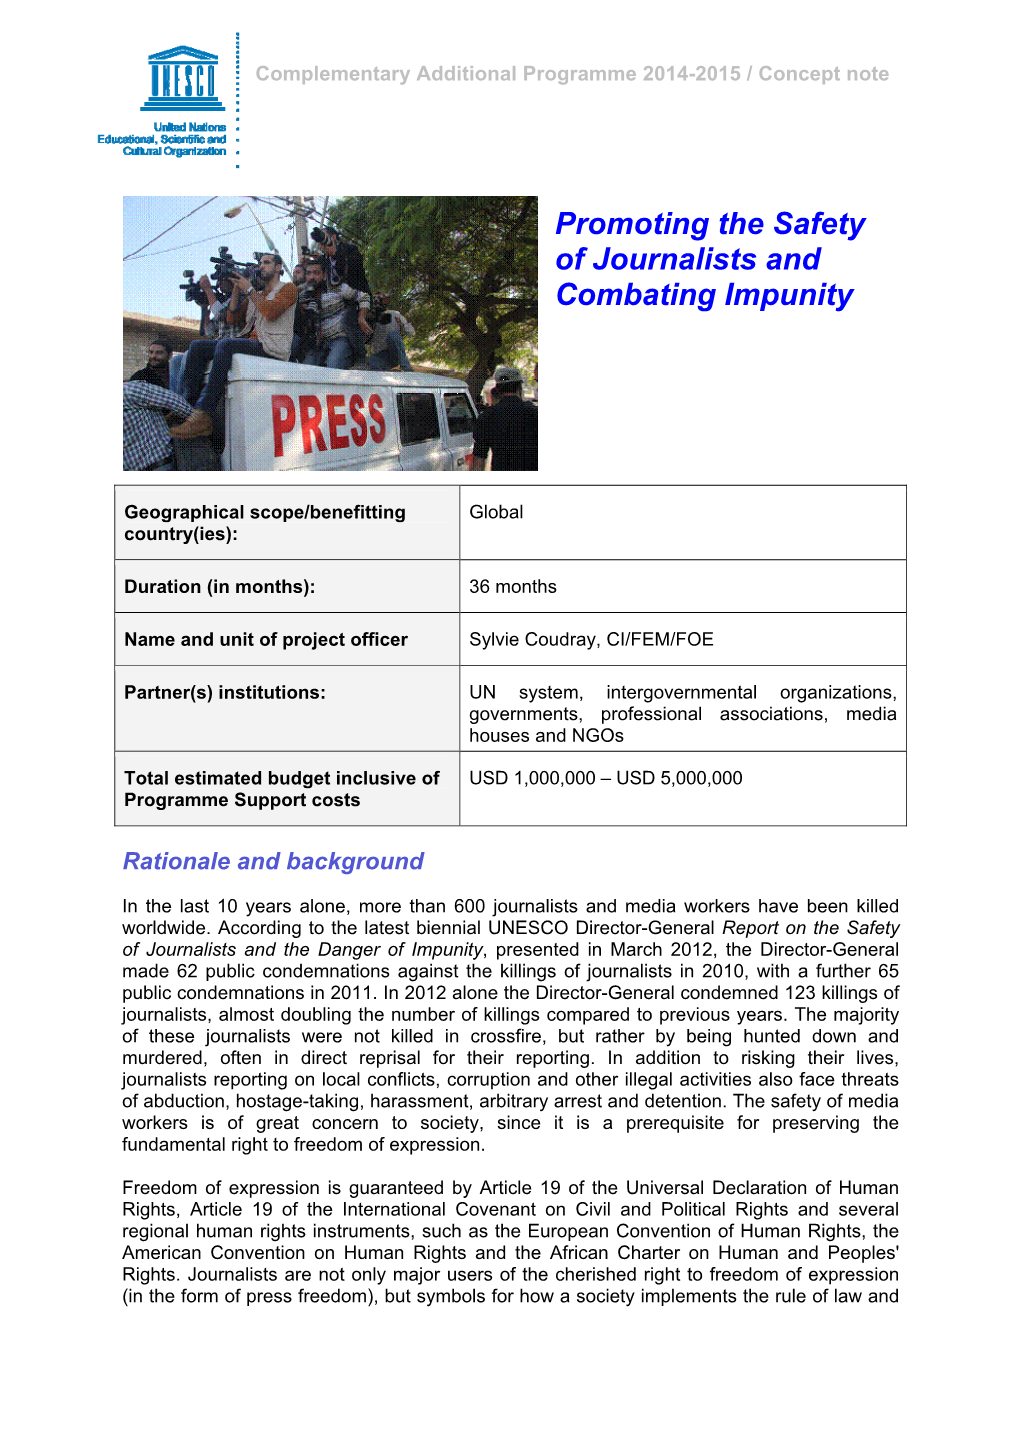 D Promoting the Safety of Journalists an Combating Impunity